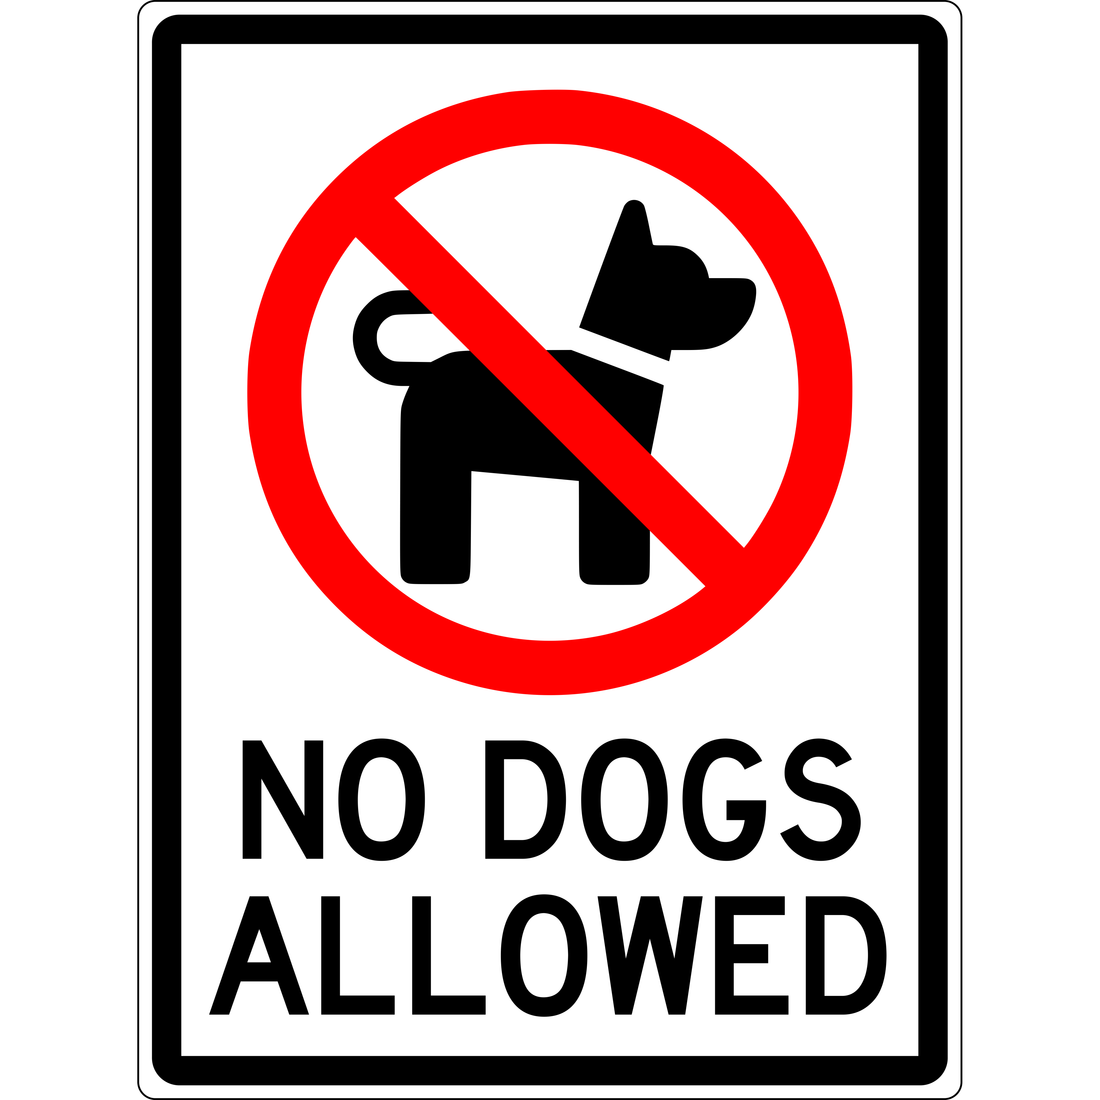 PROHIBITION - NO DOGS ALLOWED